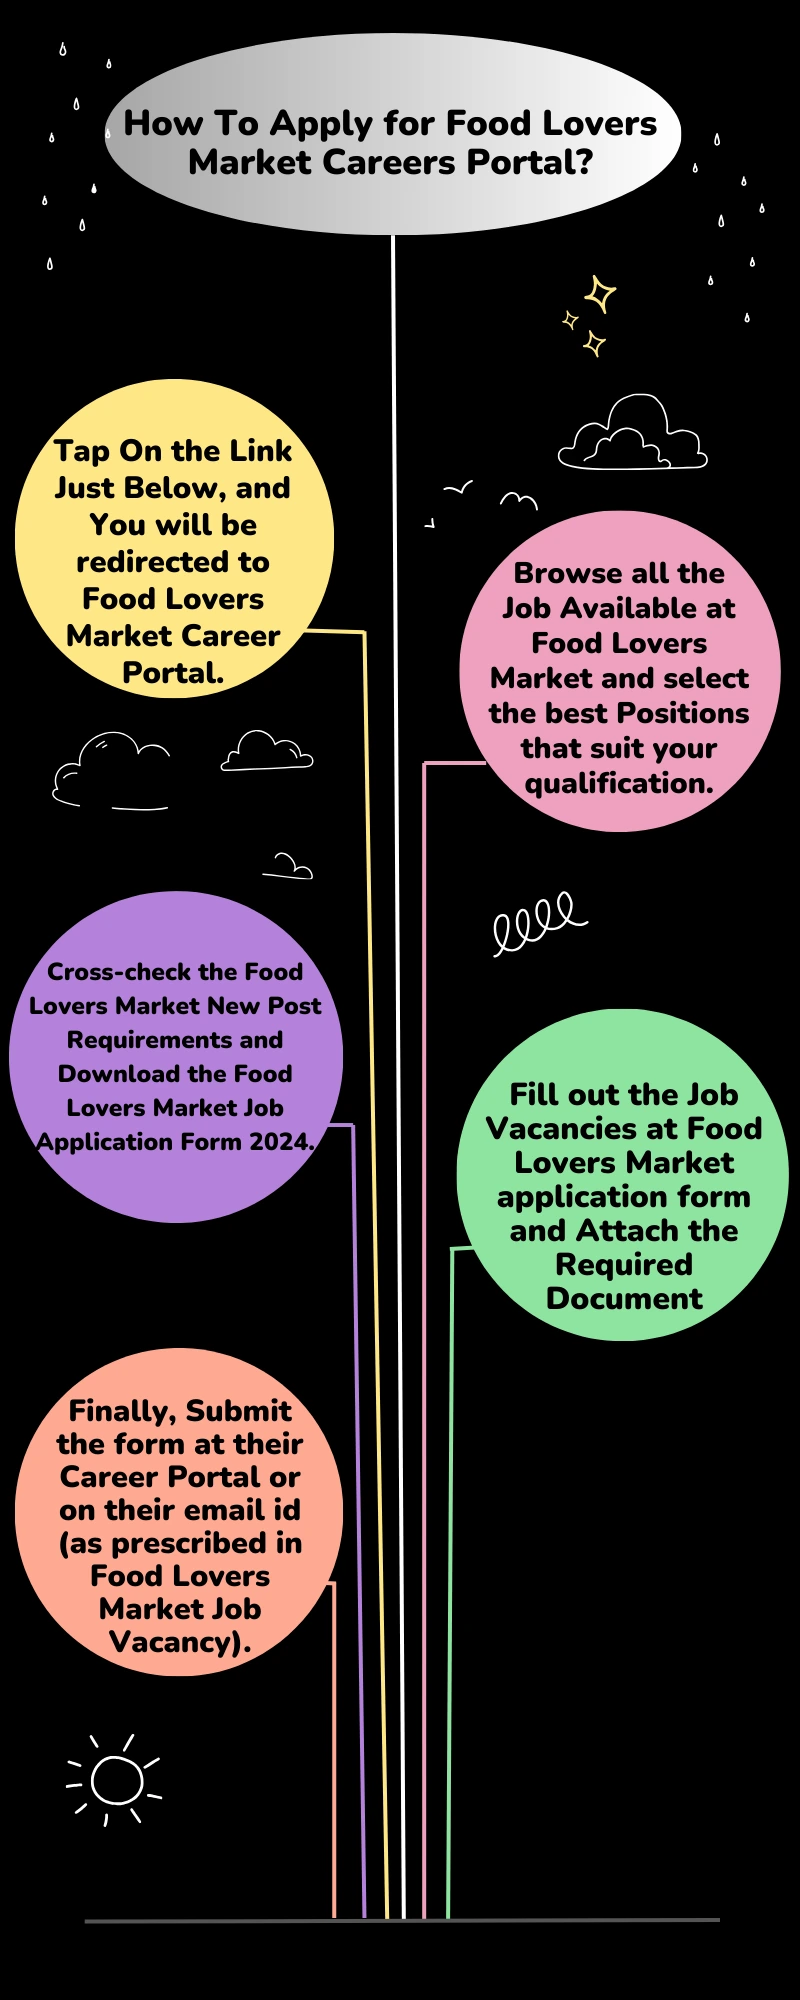 How To Apply for Food Lovers Market Careers Portal?